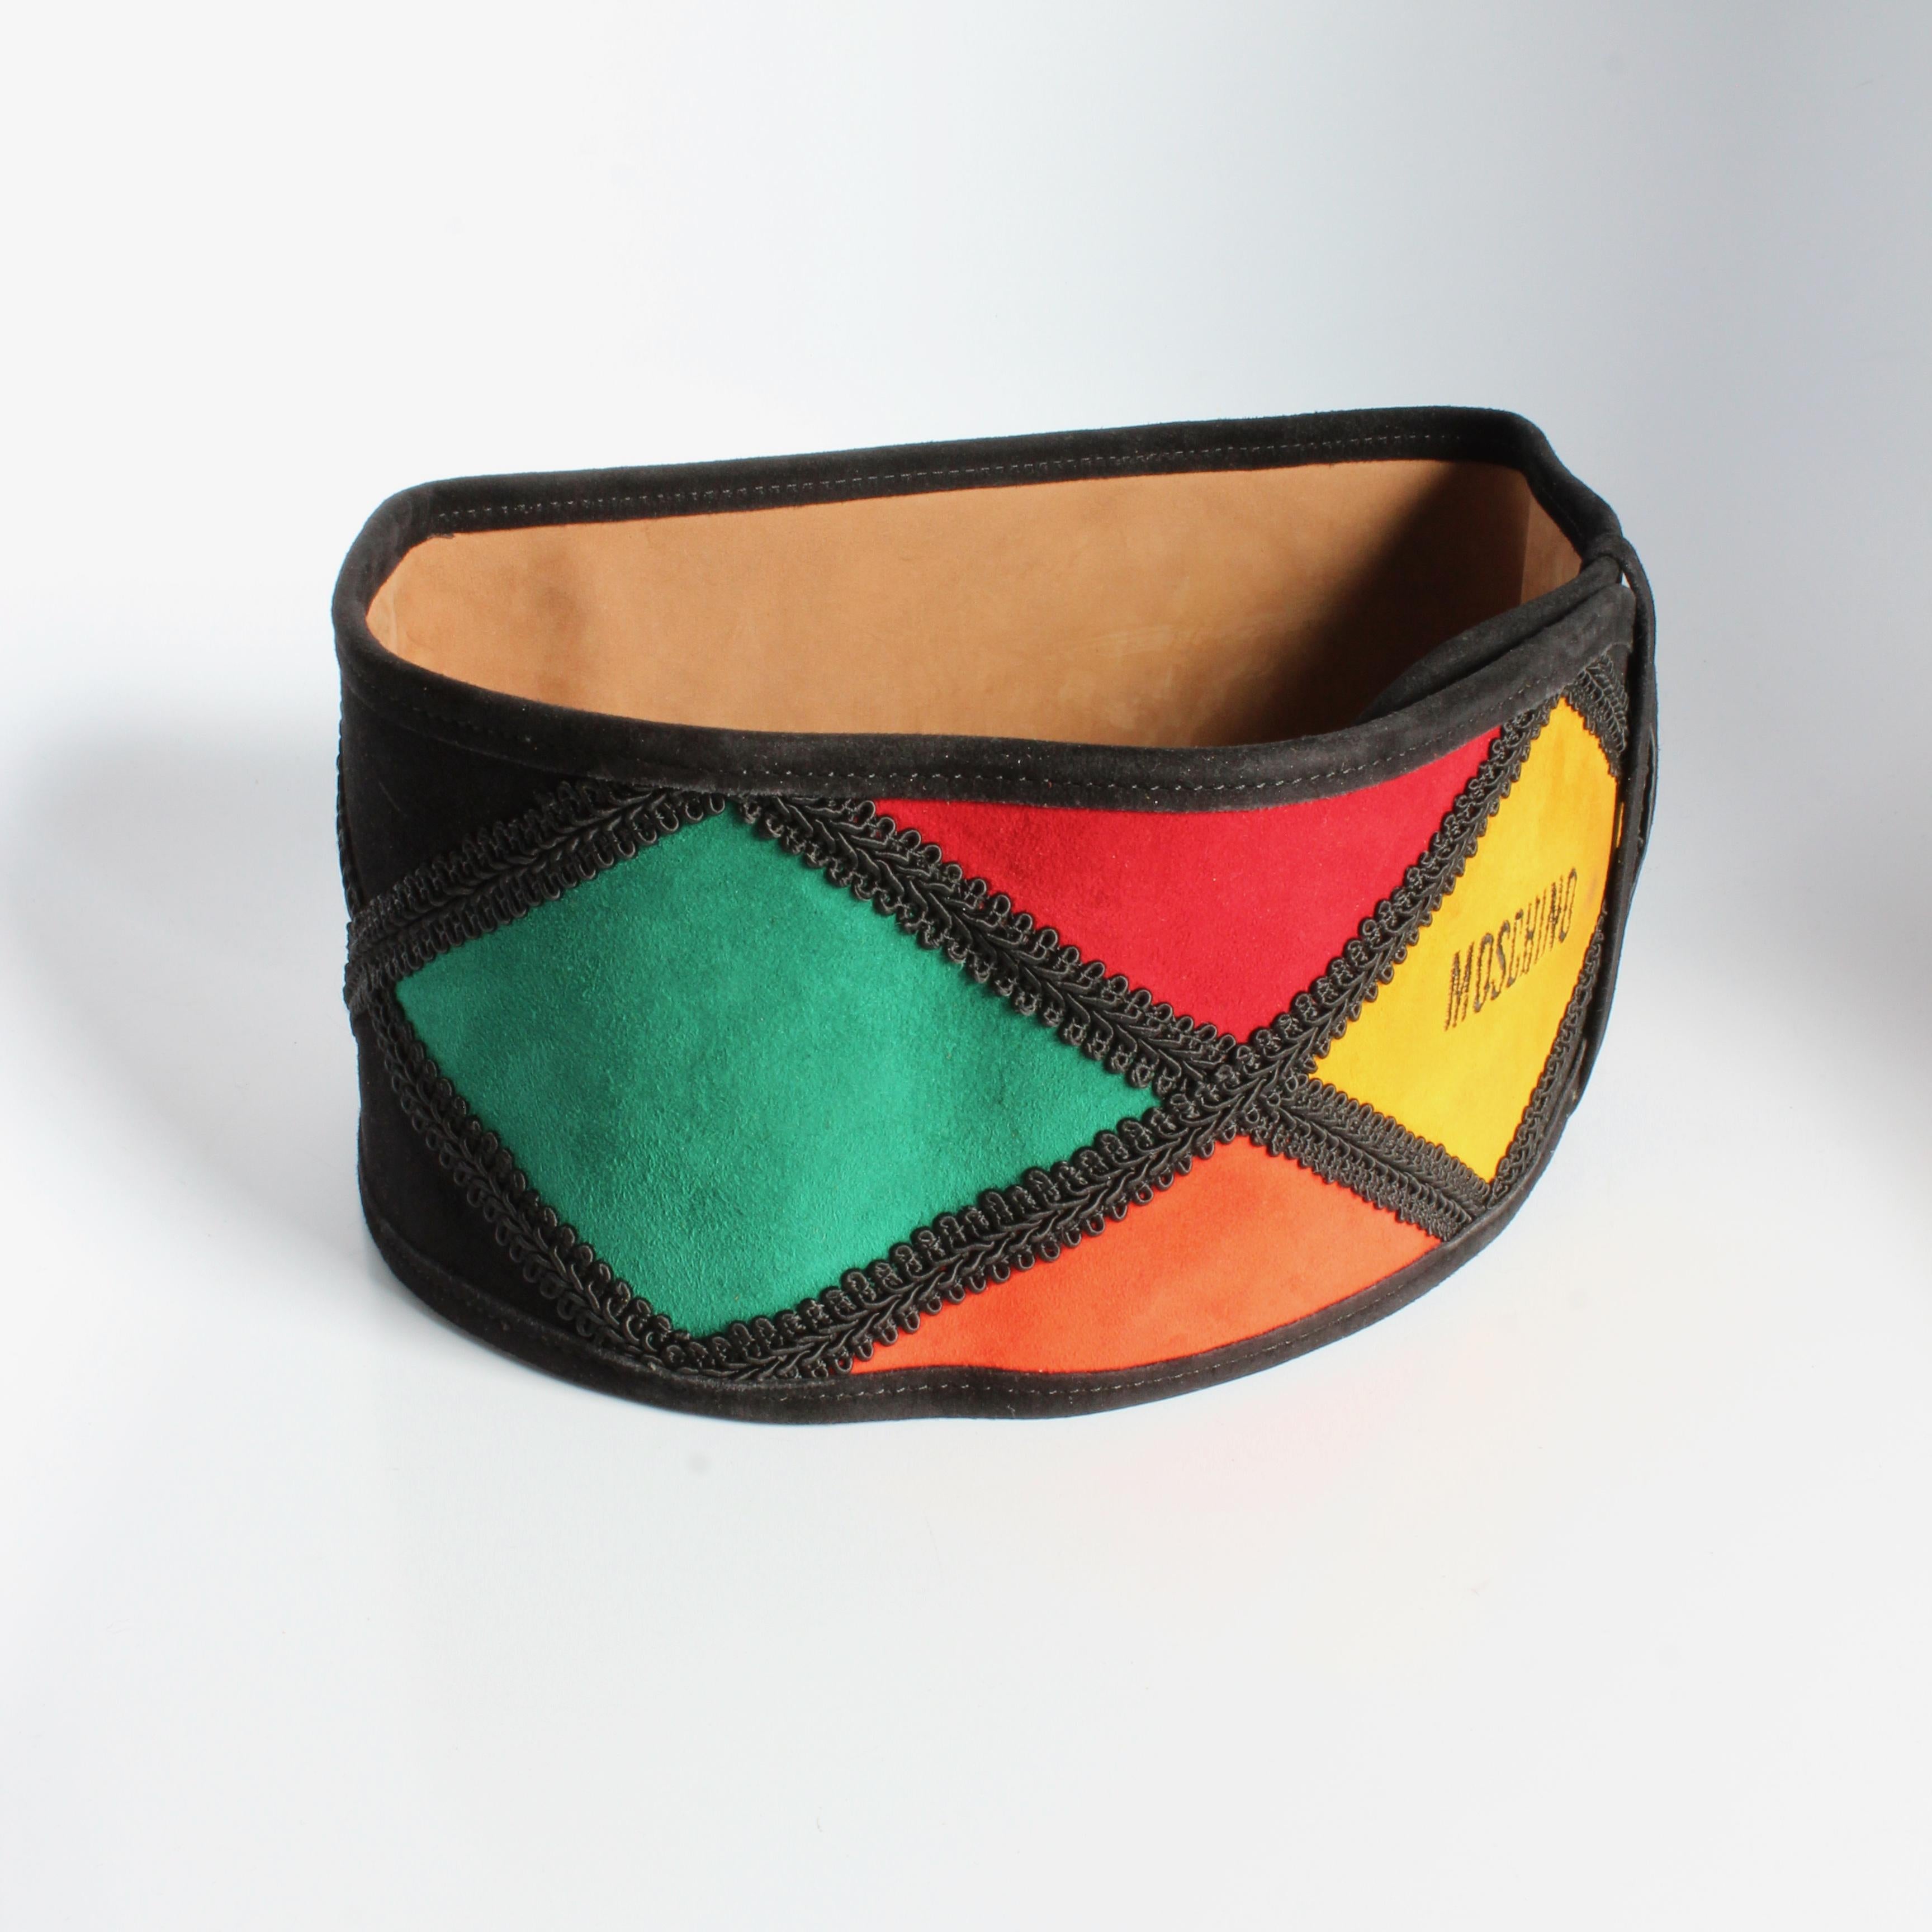 Moschino Belt Wide Harlequin Patch Multicolor Suede Leather Redwall Italy Rare In Good Condition For Sale In Port Saint Lucie, FL